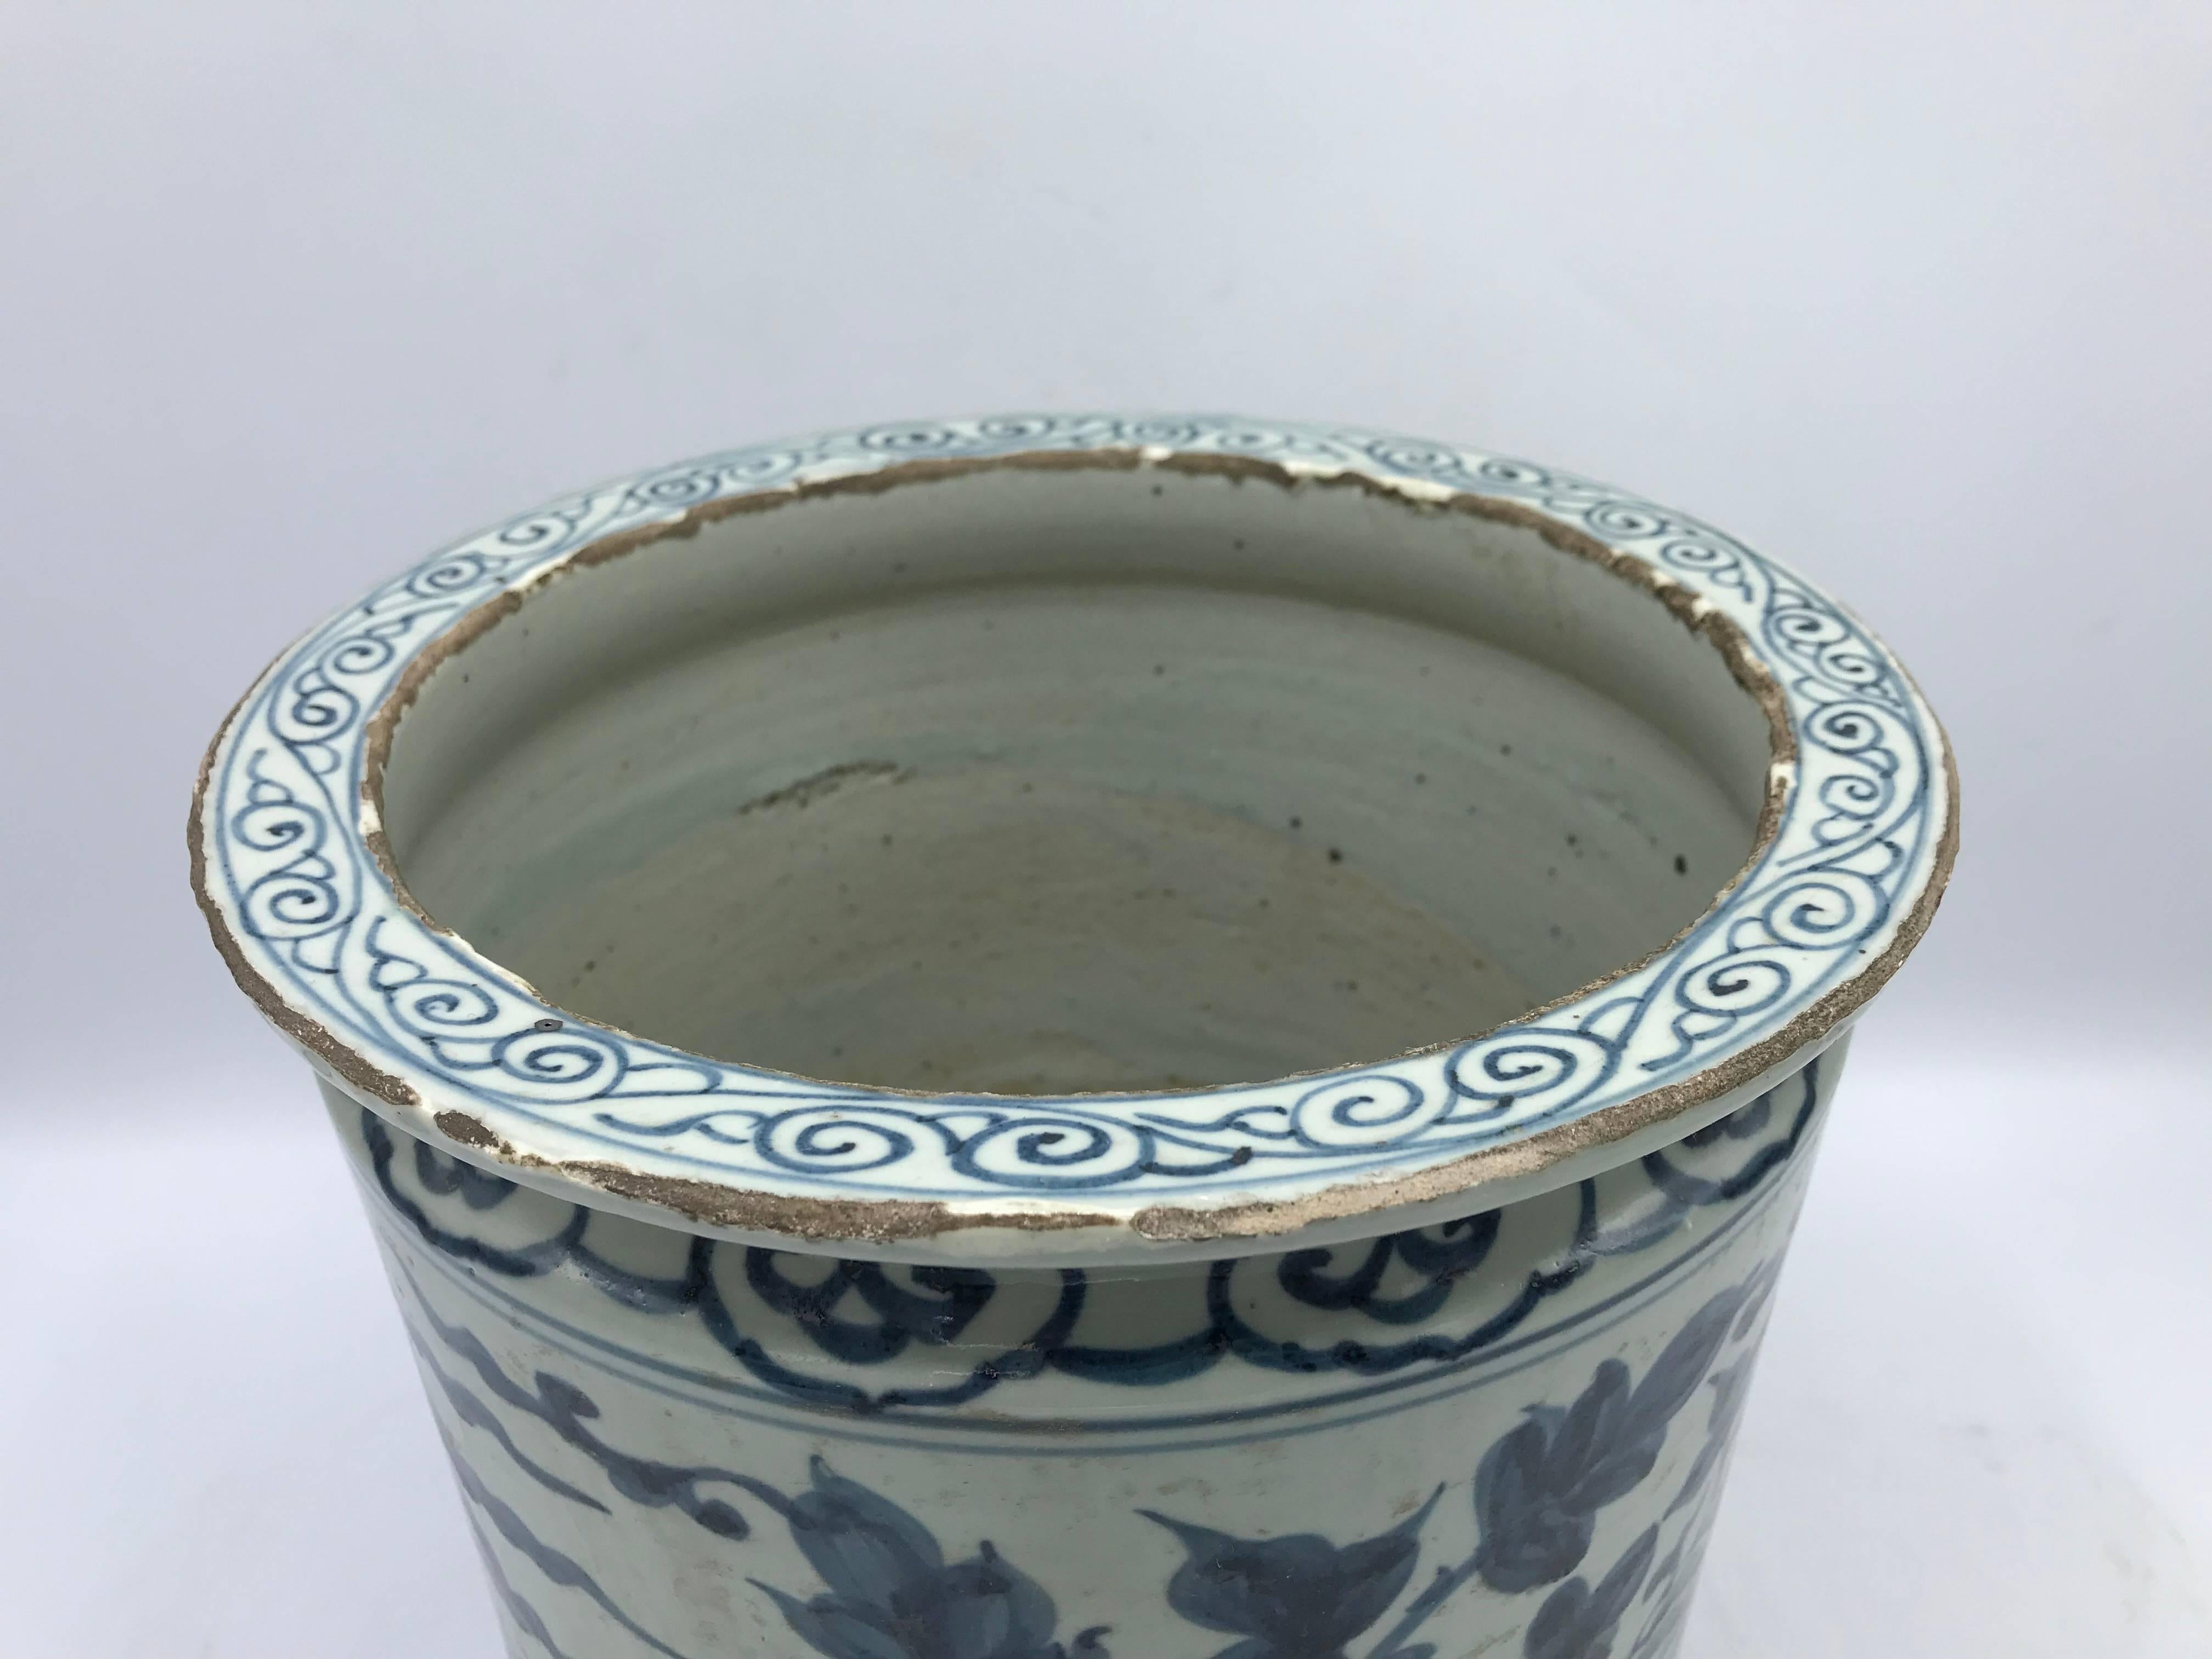 Chinoiserie 19th Century Blue and White Cachepot Planter with Peacock and Floral Motif